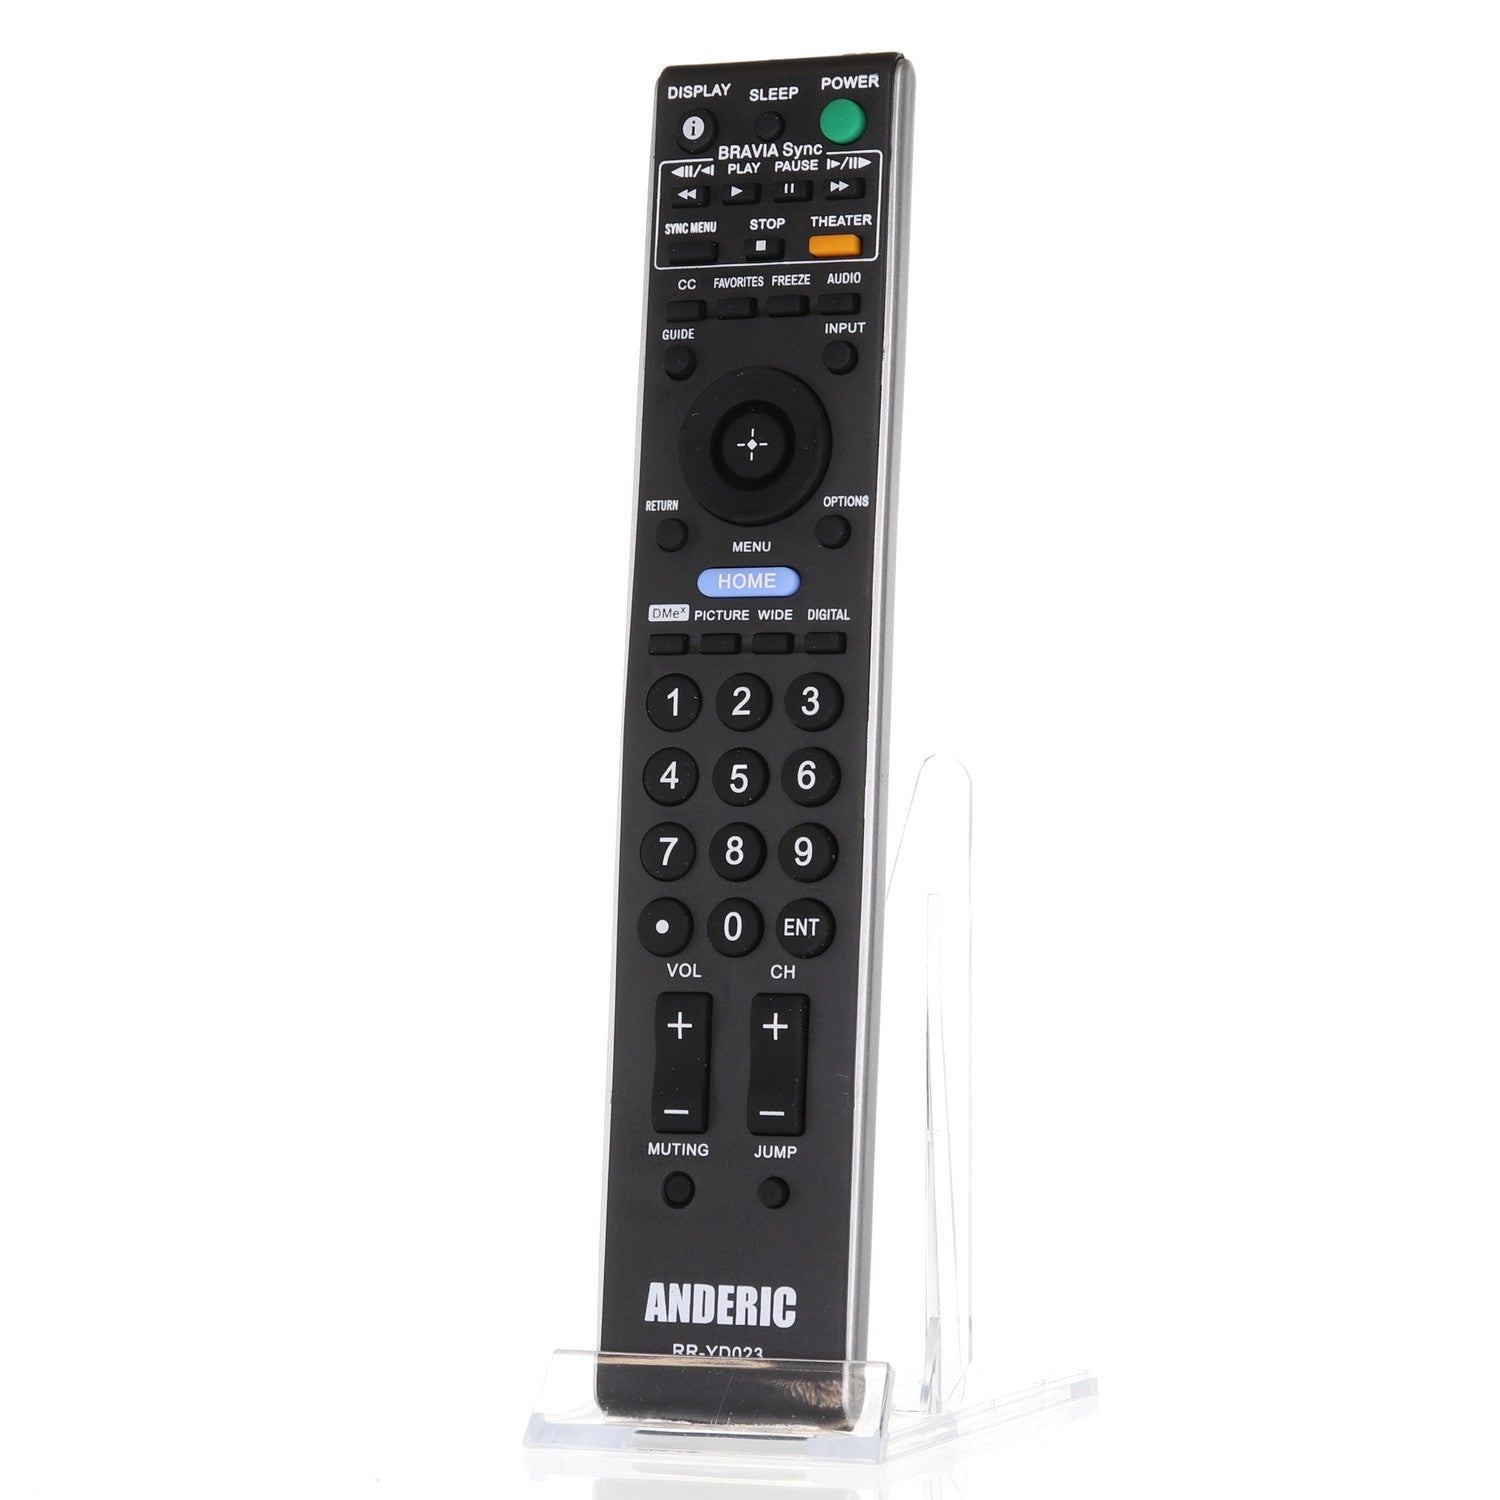 RRYD023 Remote Control for Sony® TVs